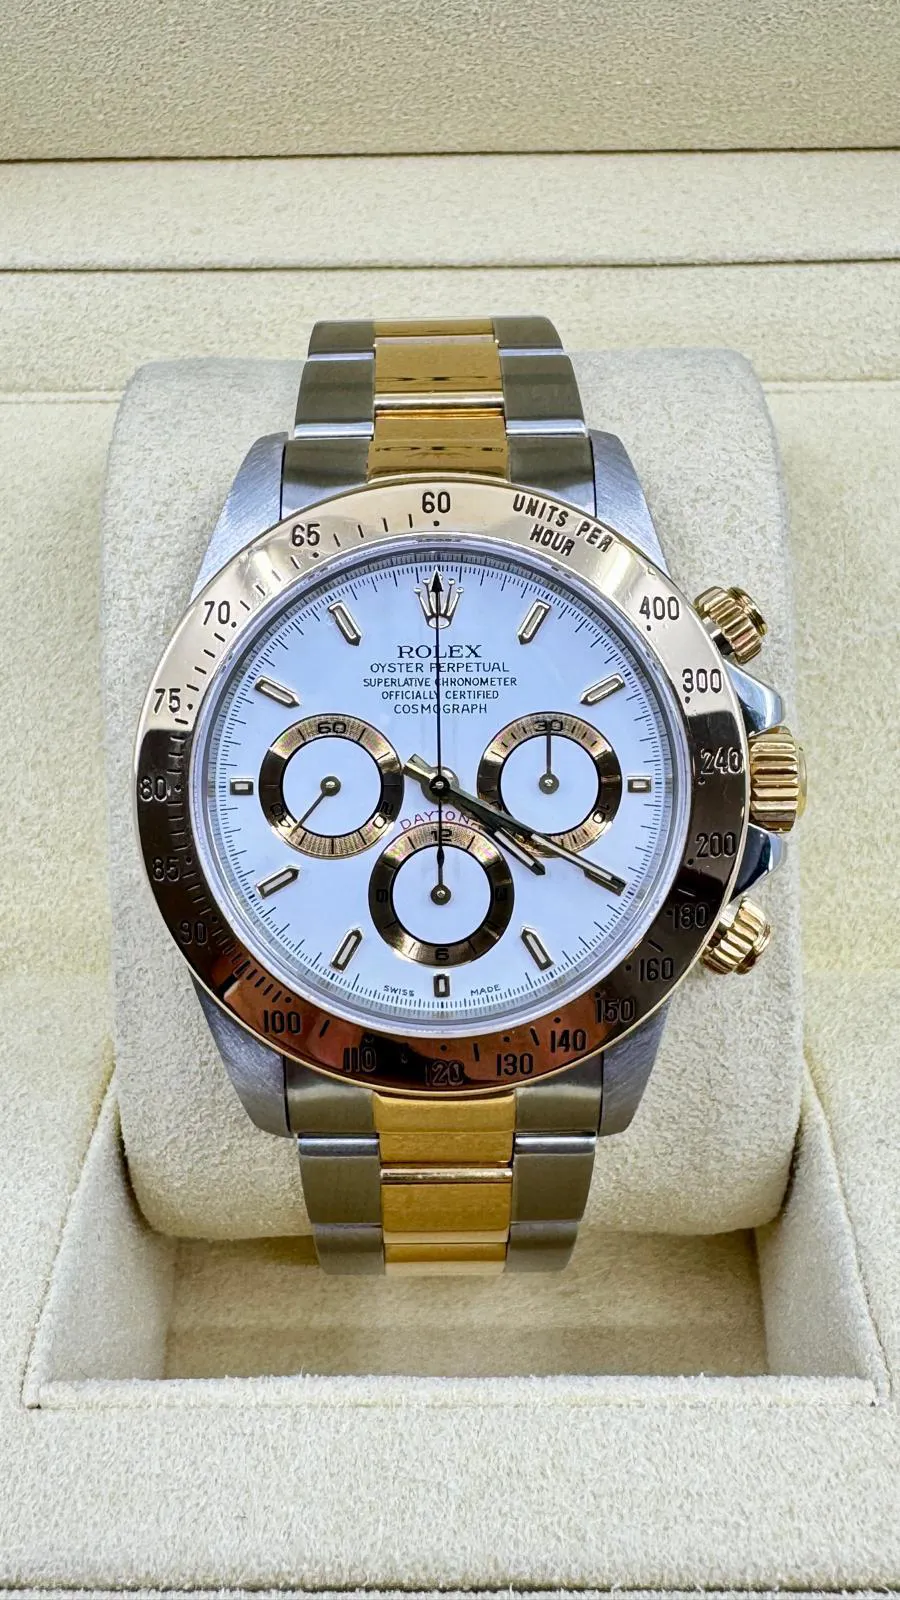 Rolex Daytona 16523 40mm Gold and stainless steel